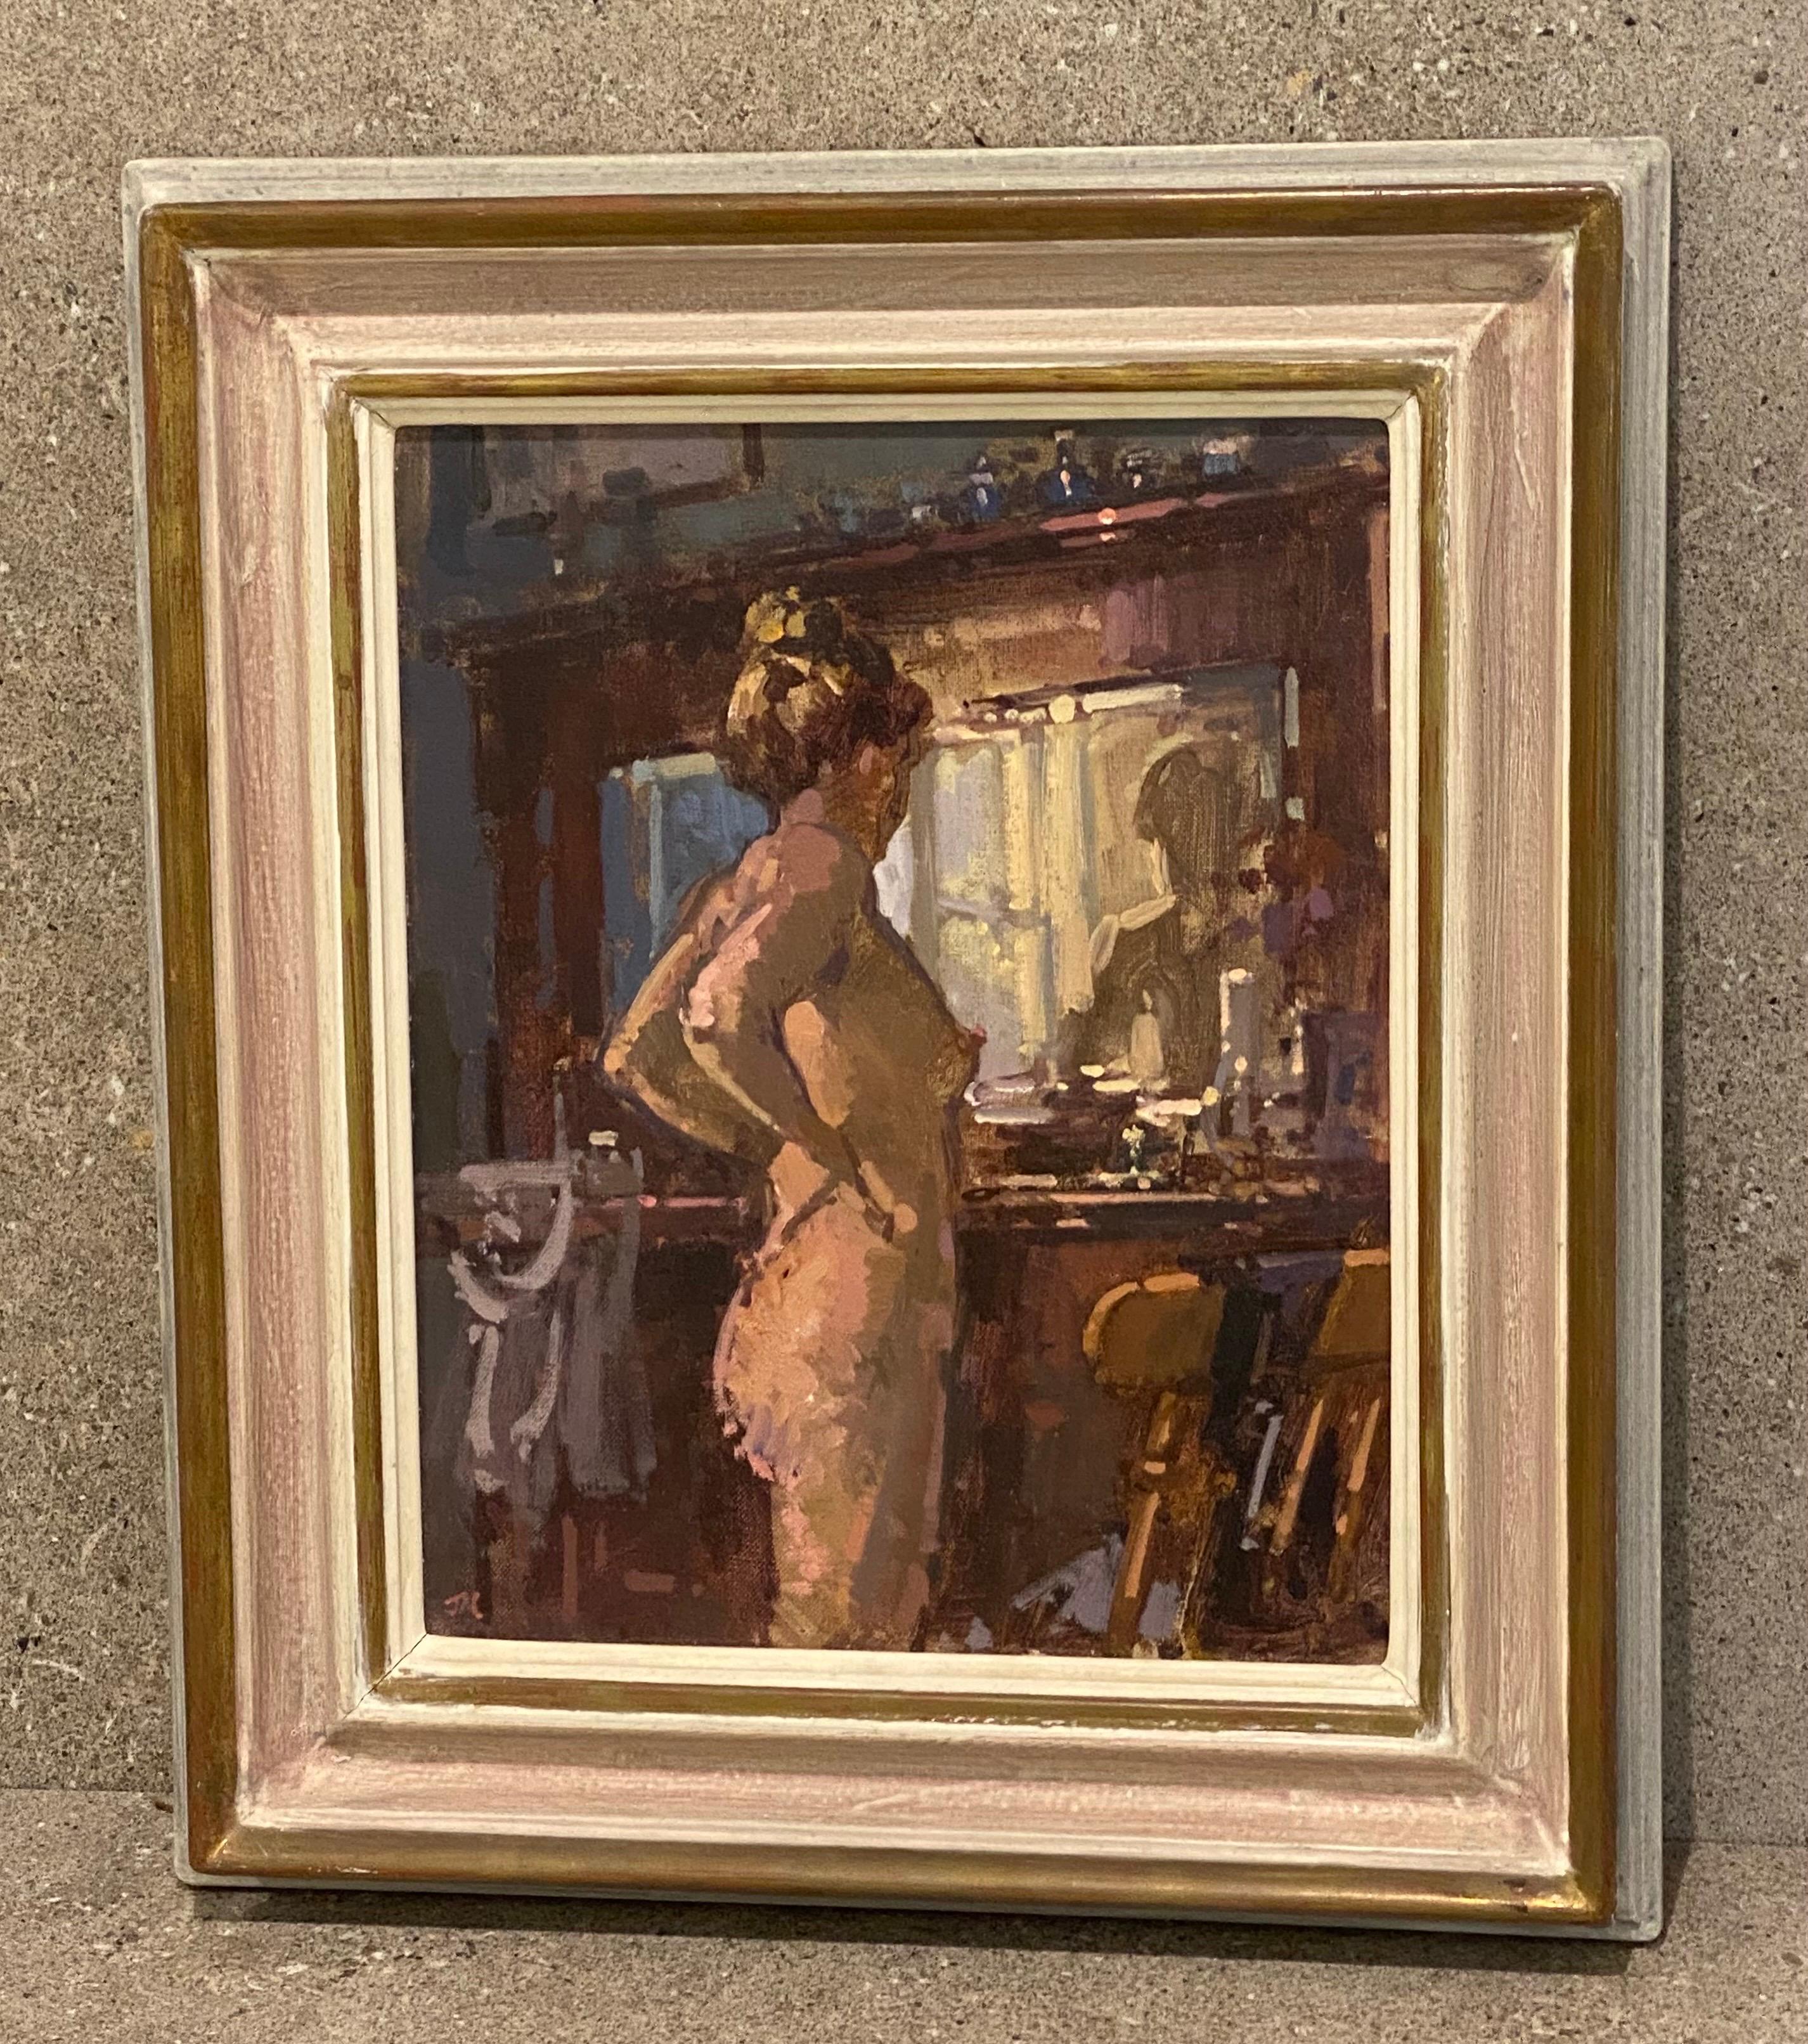 John Martin 1957 RBA. Impressionist Nude Oil on Canvas Painting 
Signed with initials JM. Titled Bella at the Dresser
John Martin was born in 1957. He studied at Hornsey followed by three years at Exeter College of Art where he obtained a First